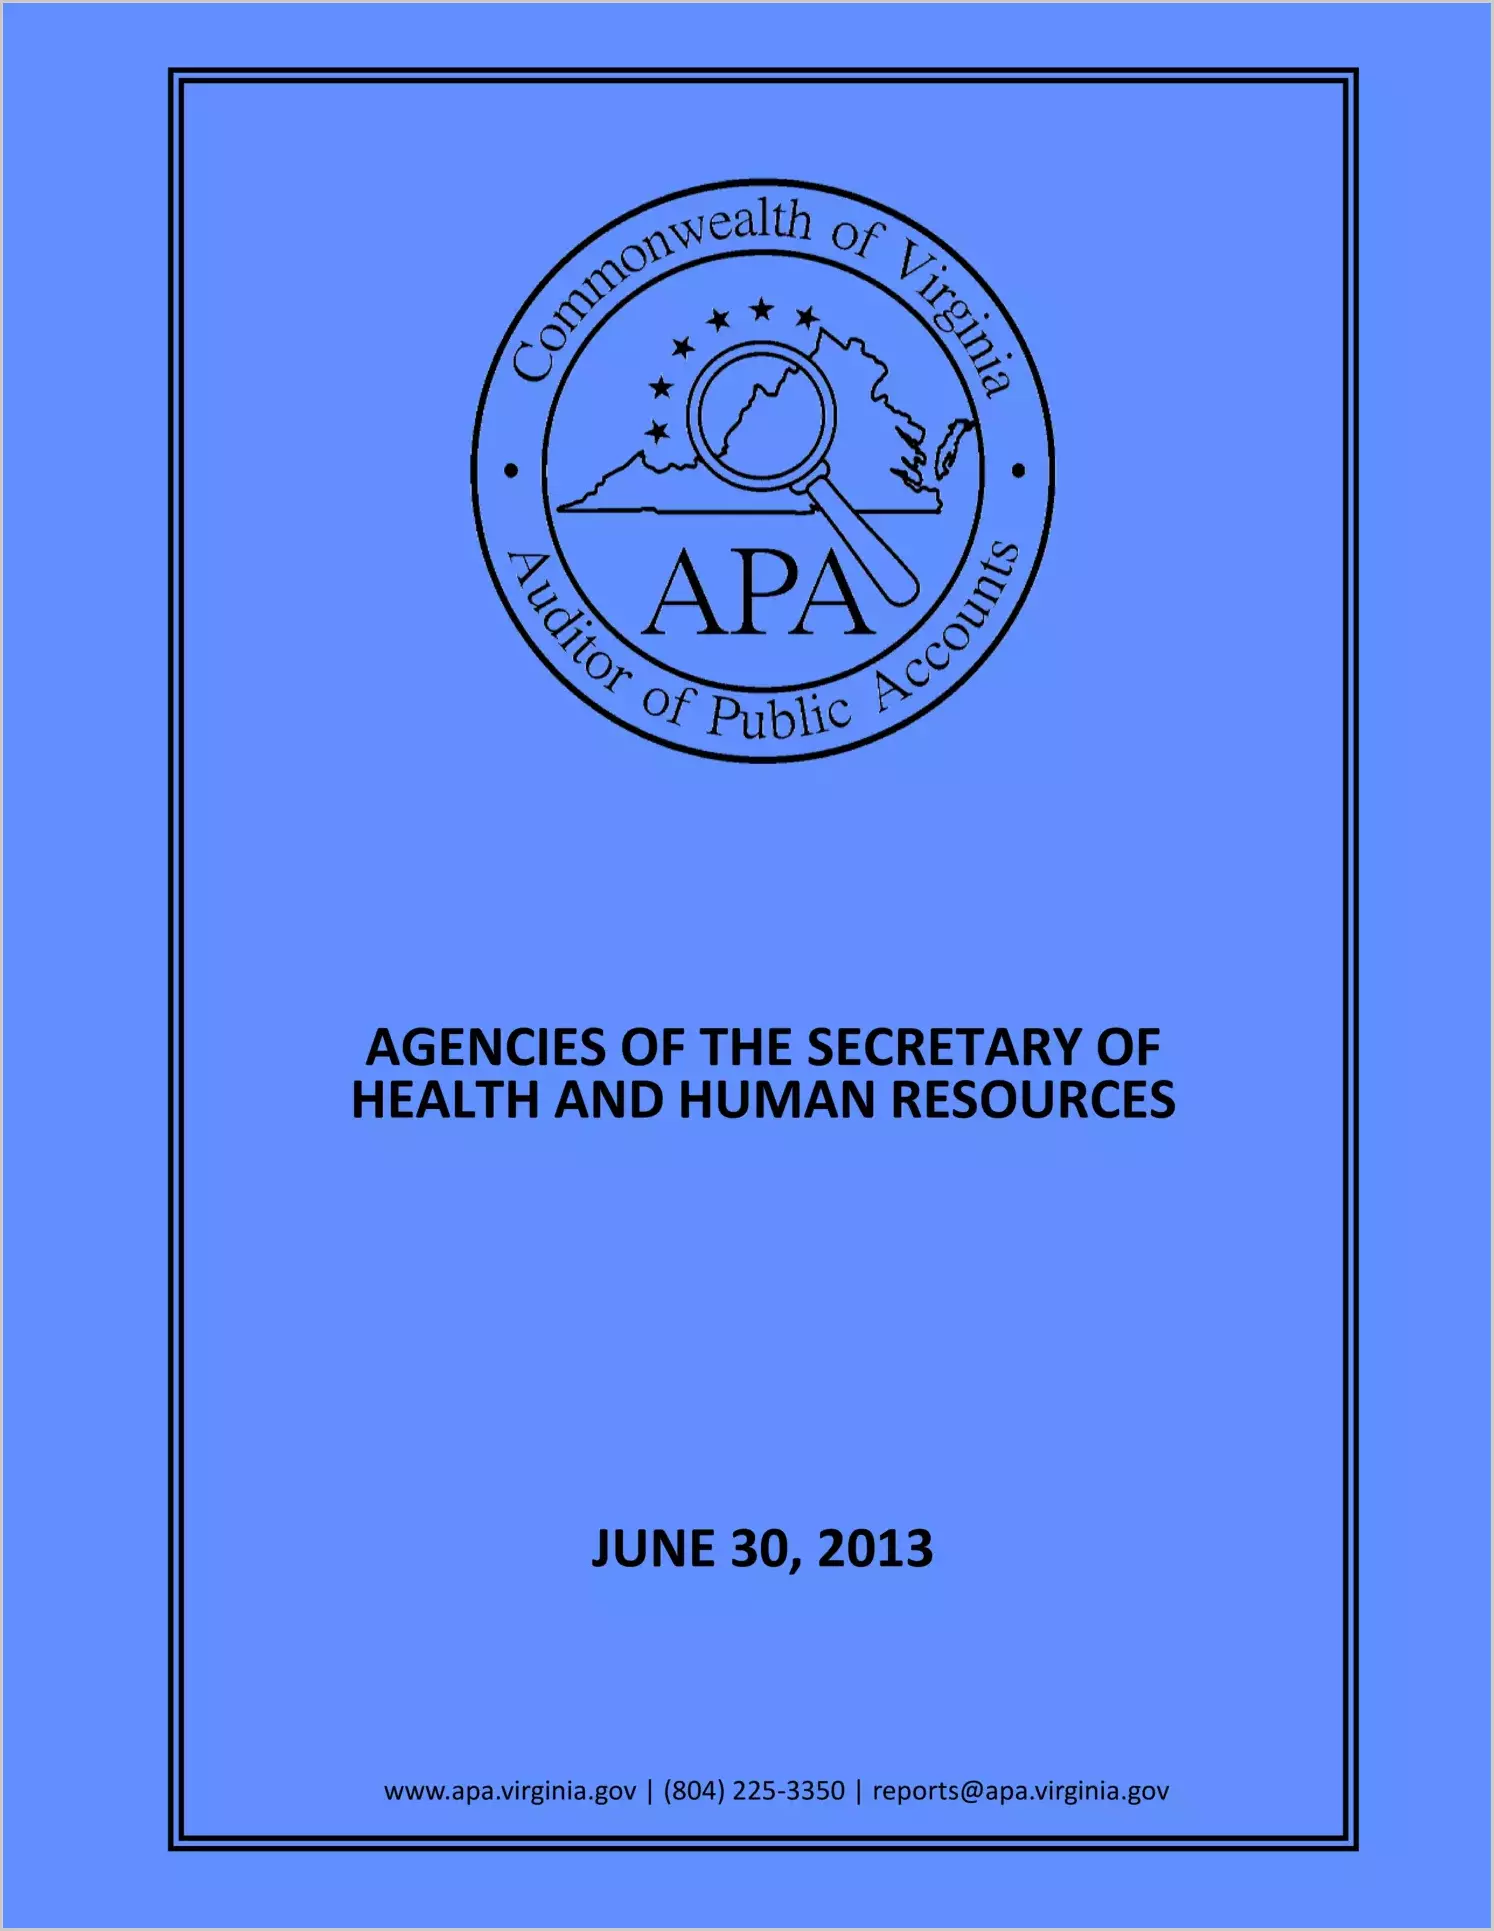 Agencies of the Secretary of Health and Human Resources - June 30, 2013